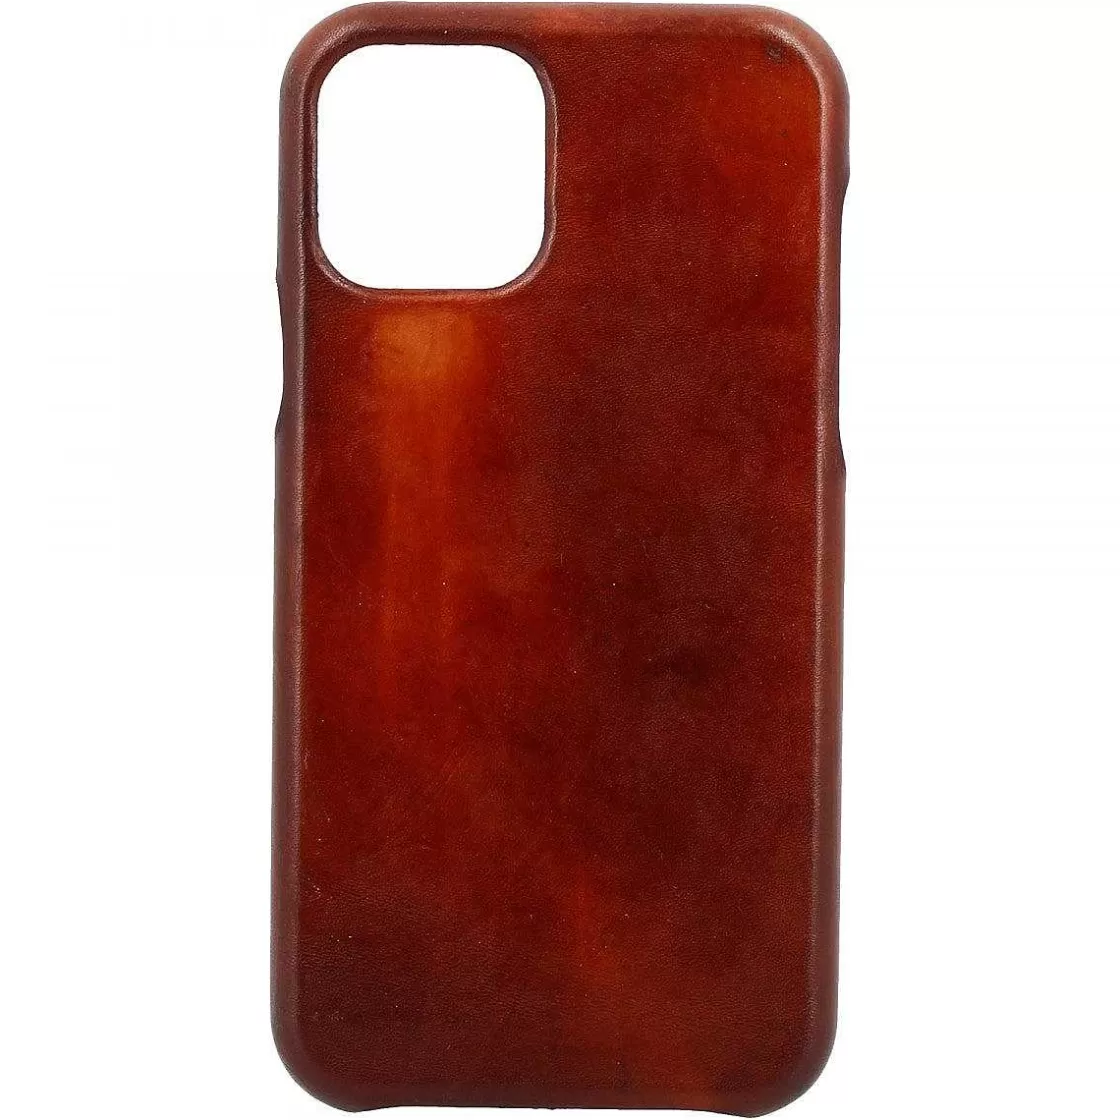 Leonardo Iphone Cover In Hand-Buffered Brandy Color Leather Store